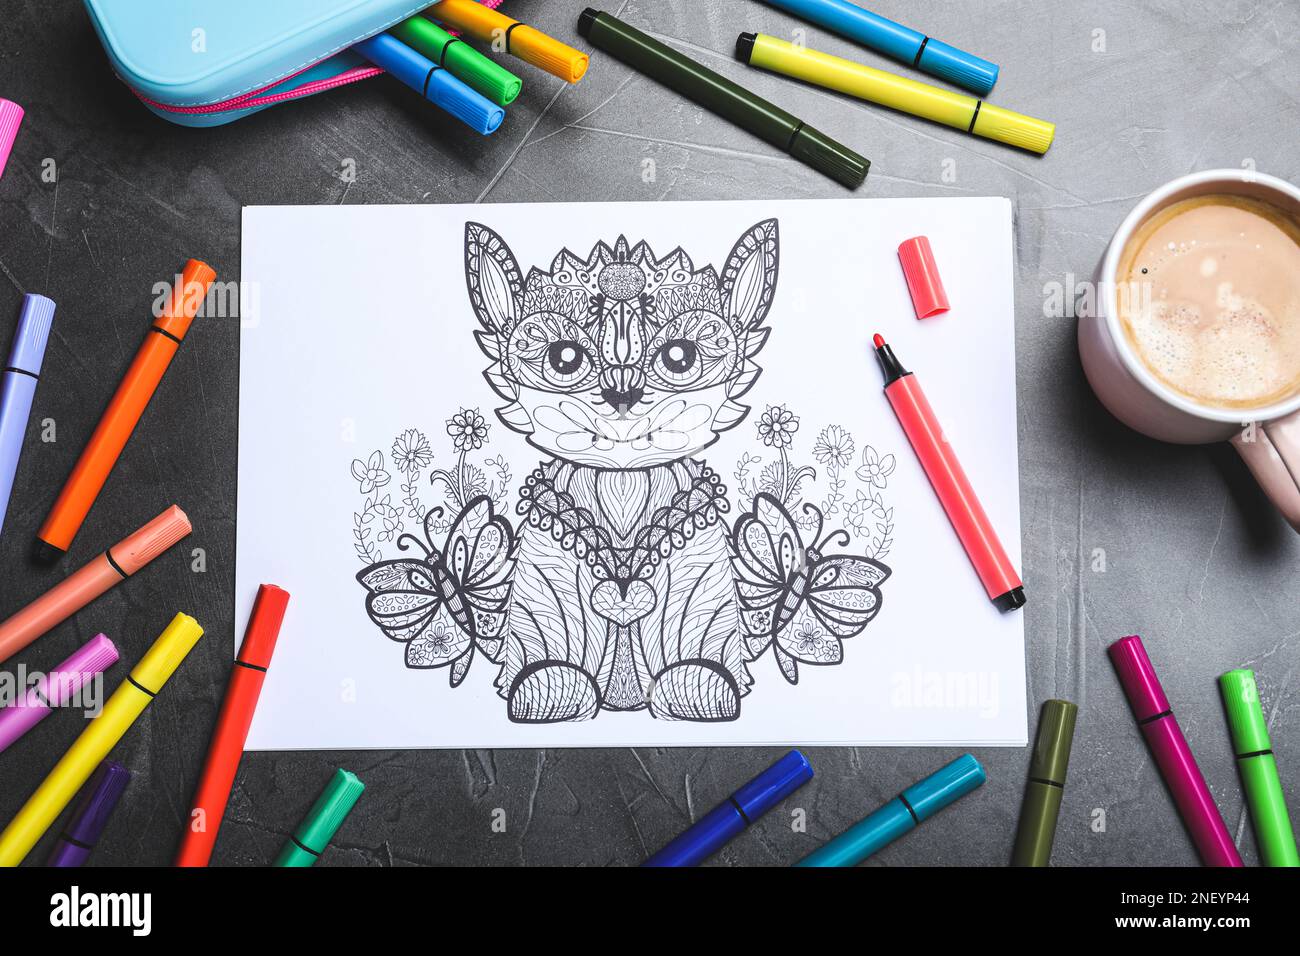 Felt Tip Pen on Antistress Coloring Page, Top View Stock Image - Image of  mood, creative: 217362015